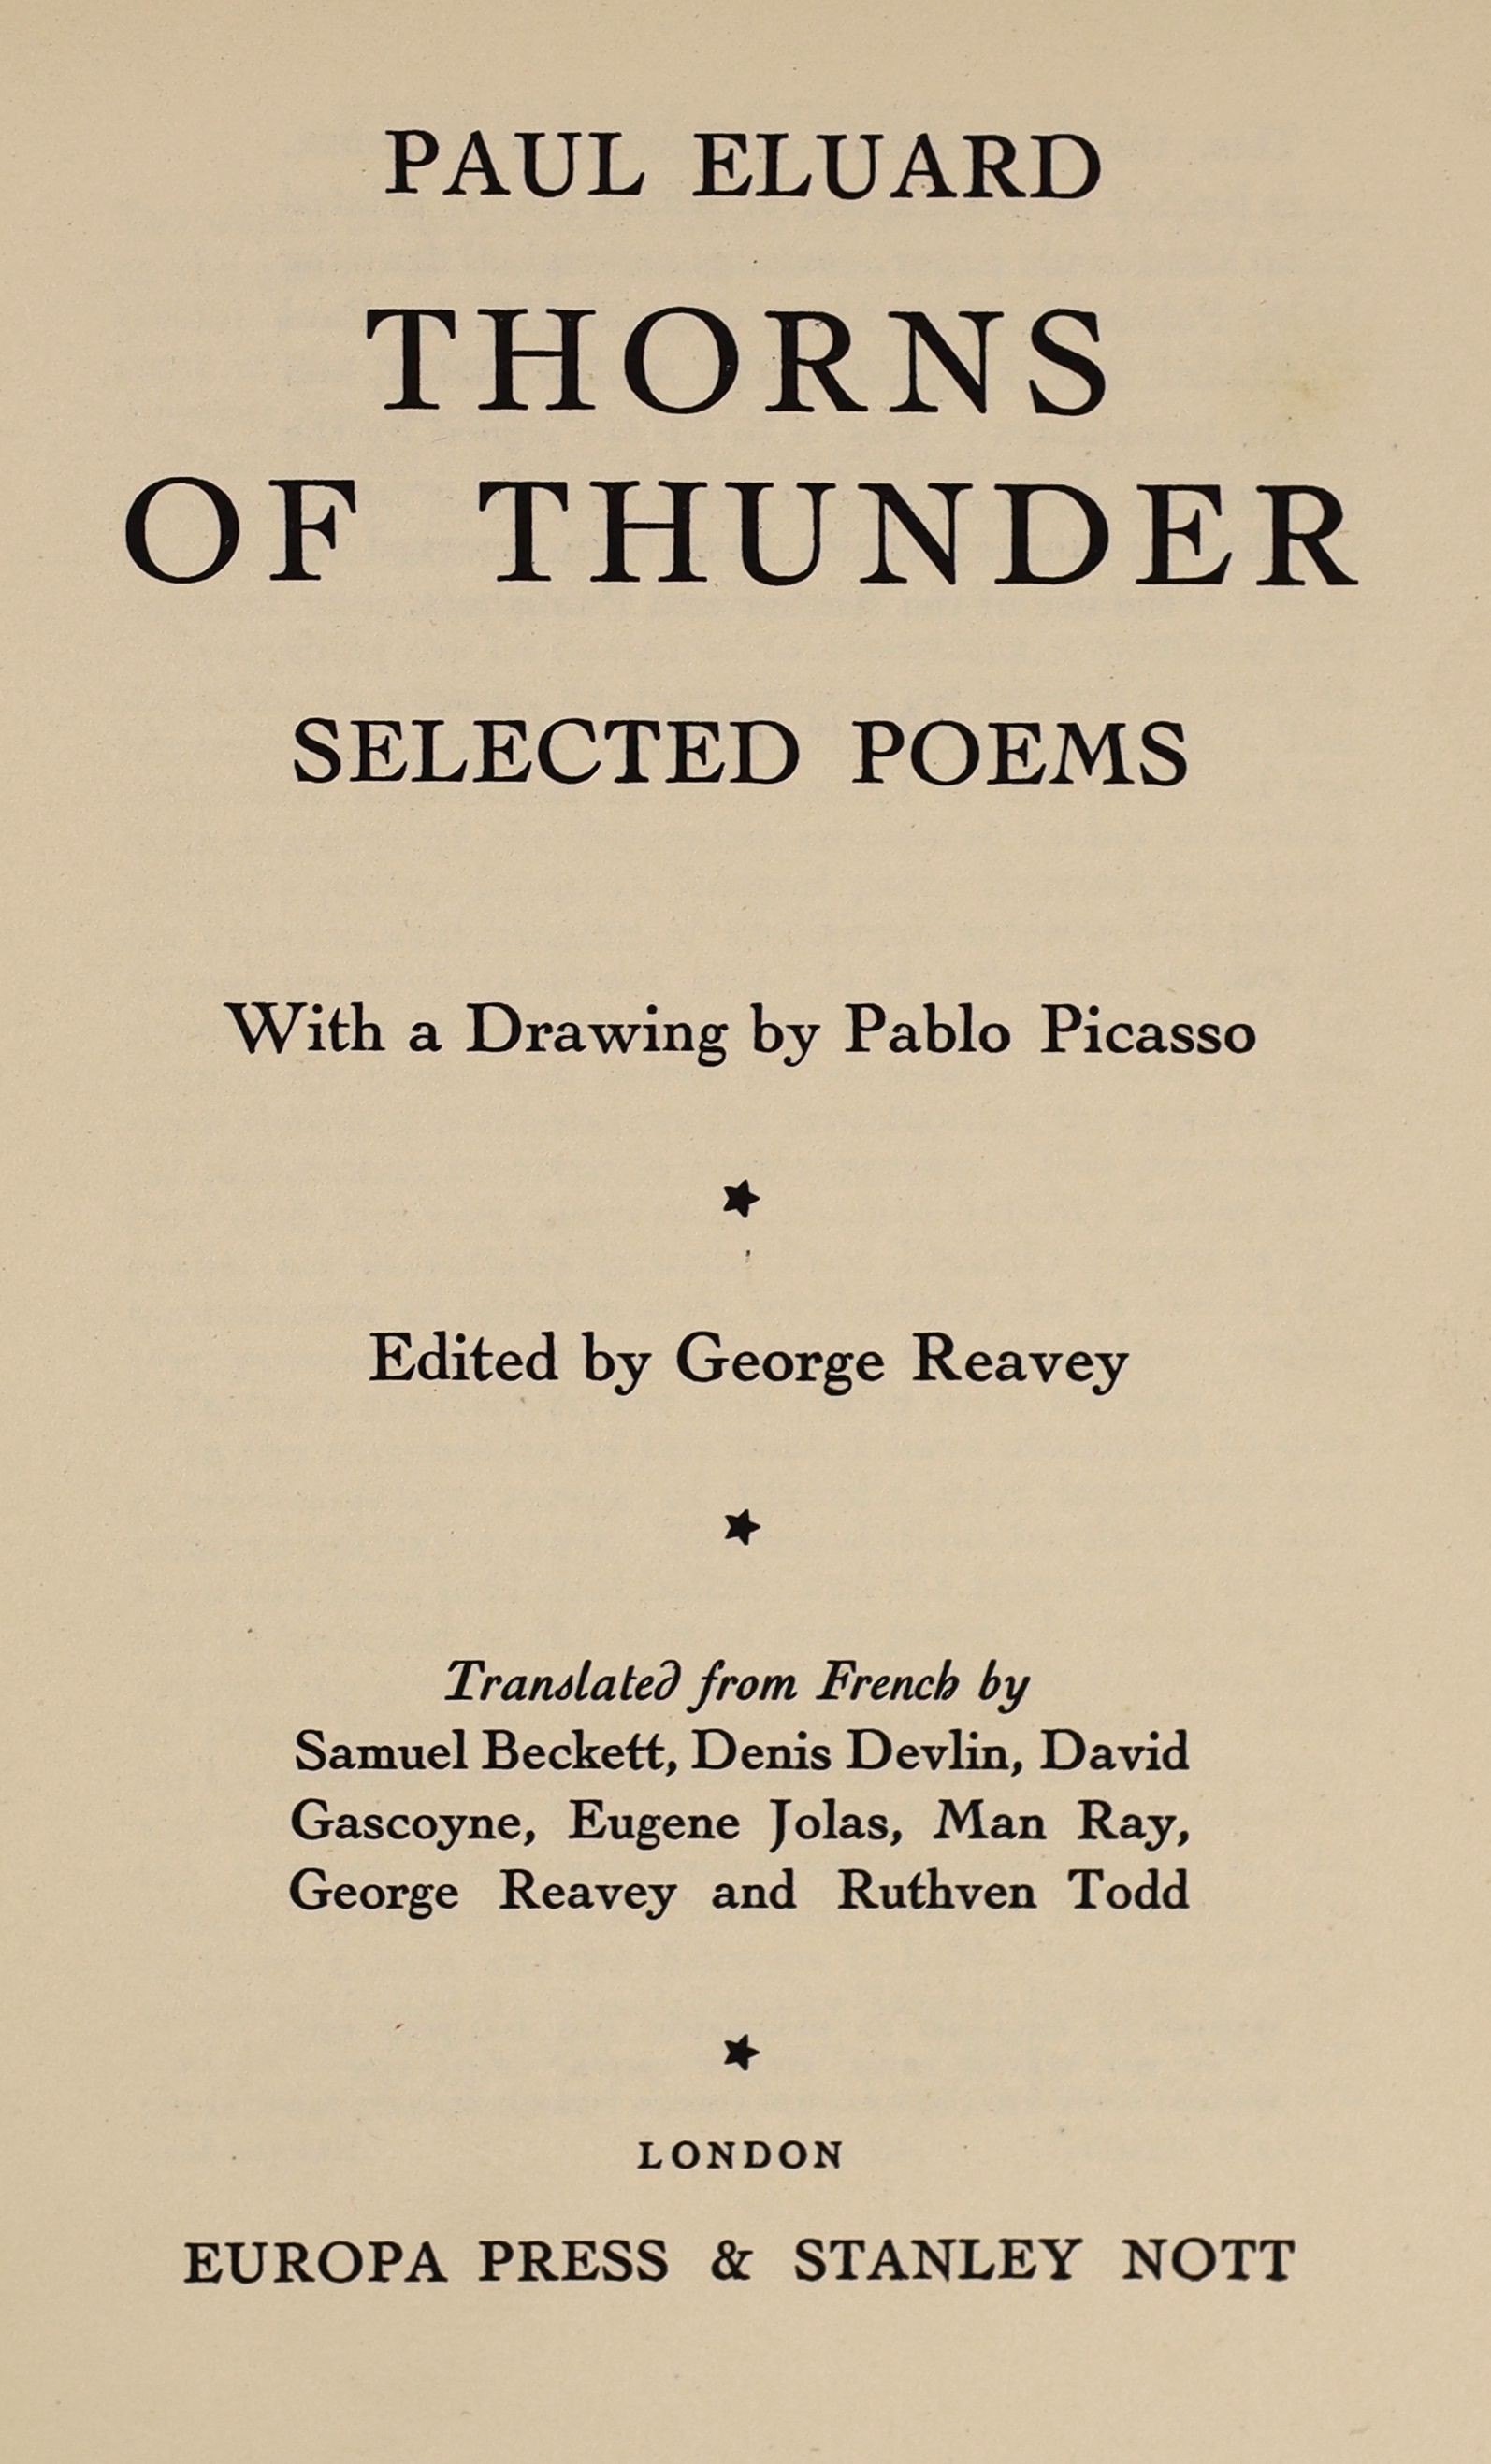 Eluard, Paul - Thorns of Thunder Selected Poems. 1st and limited ed. one of 600. With frontispiece of the author by Pablo Picasso. Cloth with letters direct on spine. With half title and limitation. 8vo. Europa Press & S